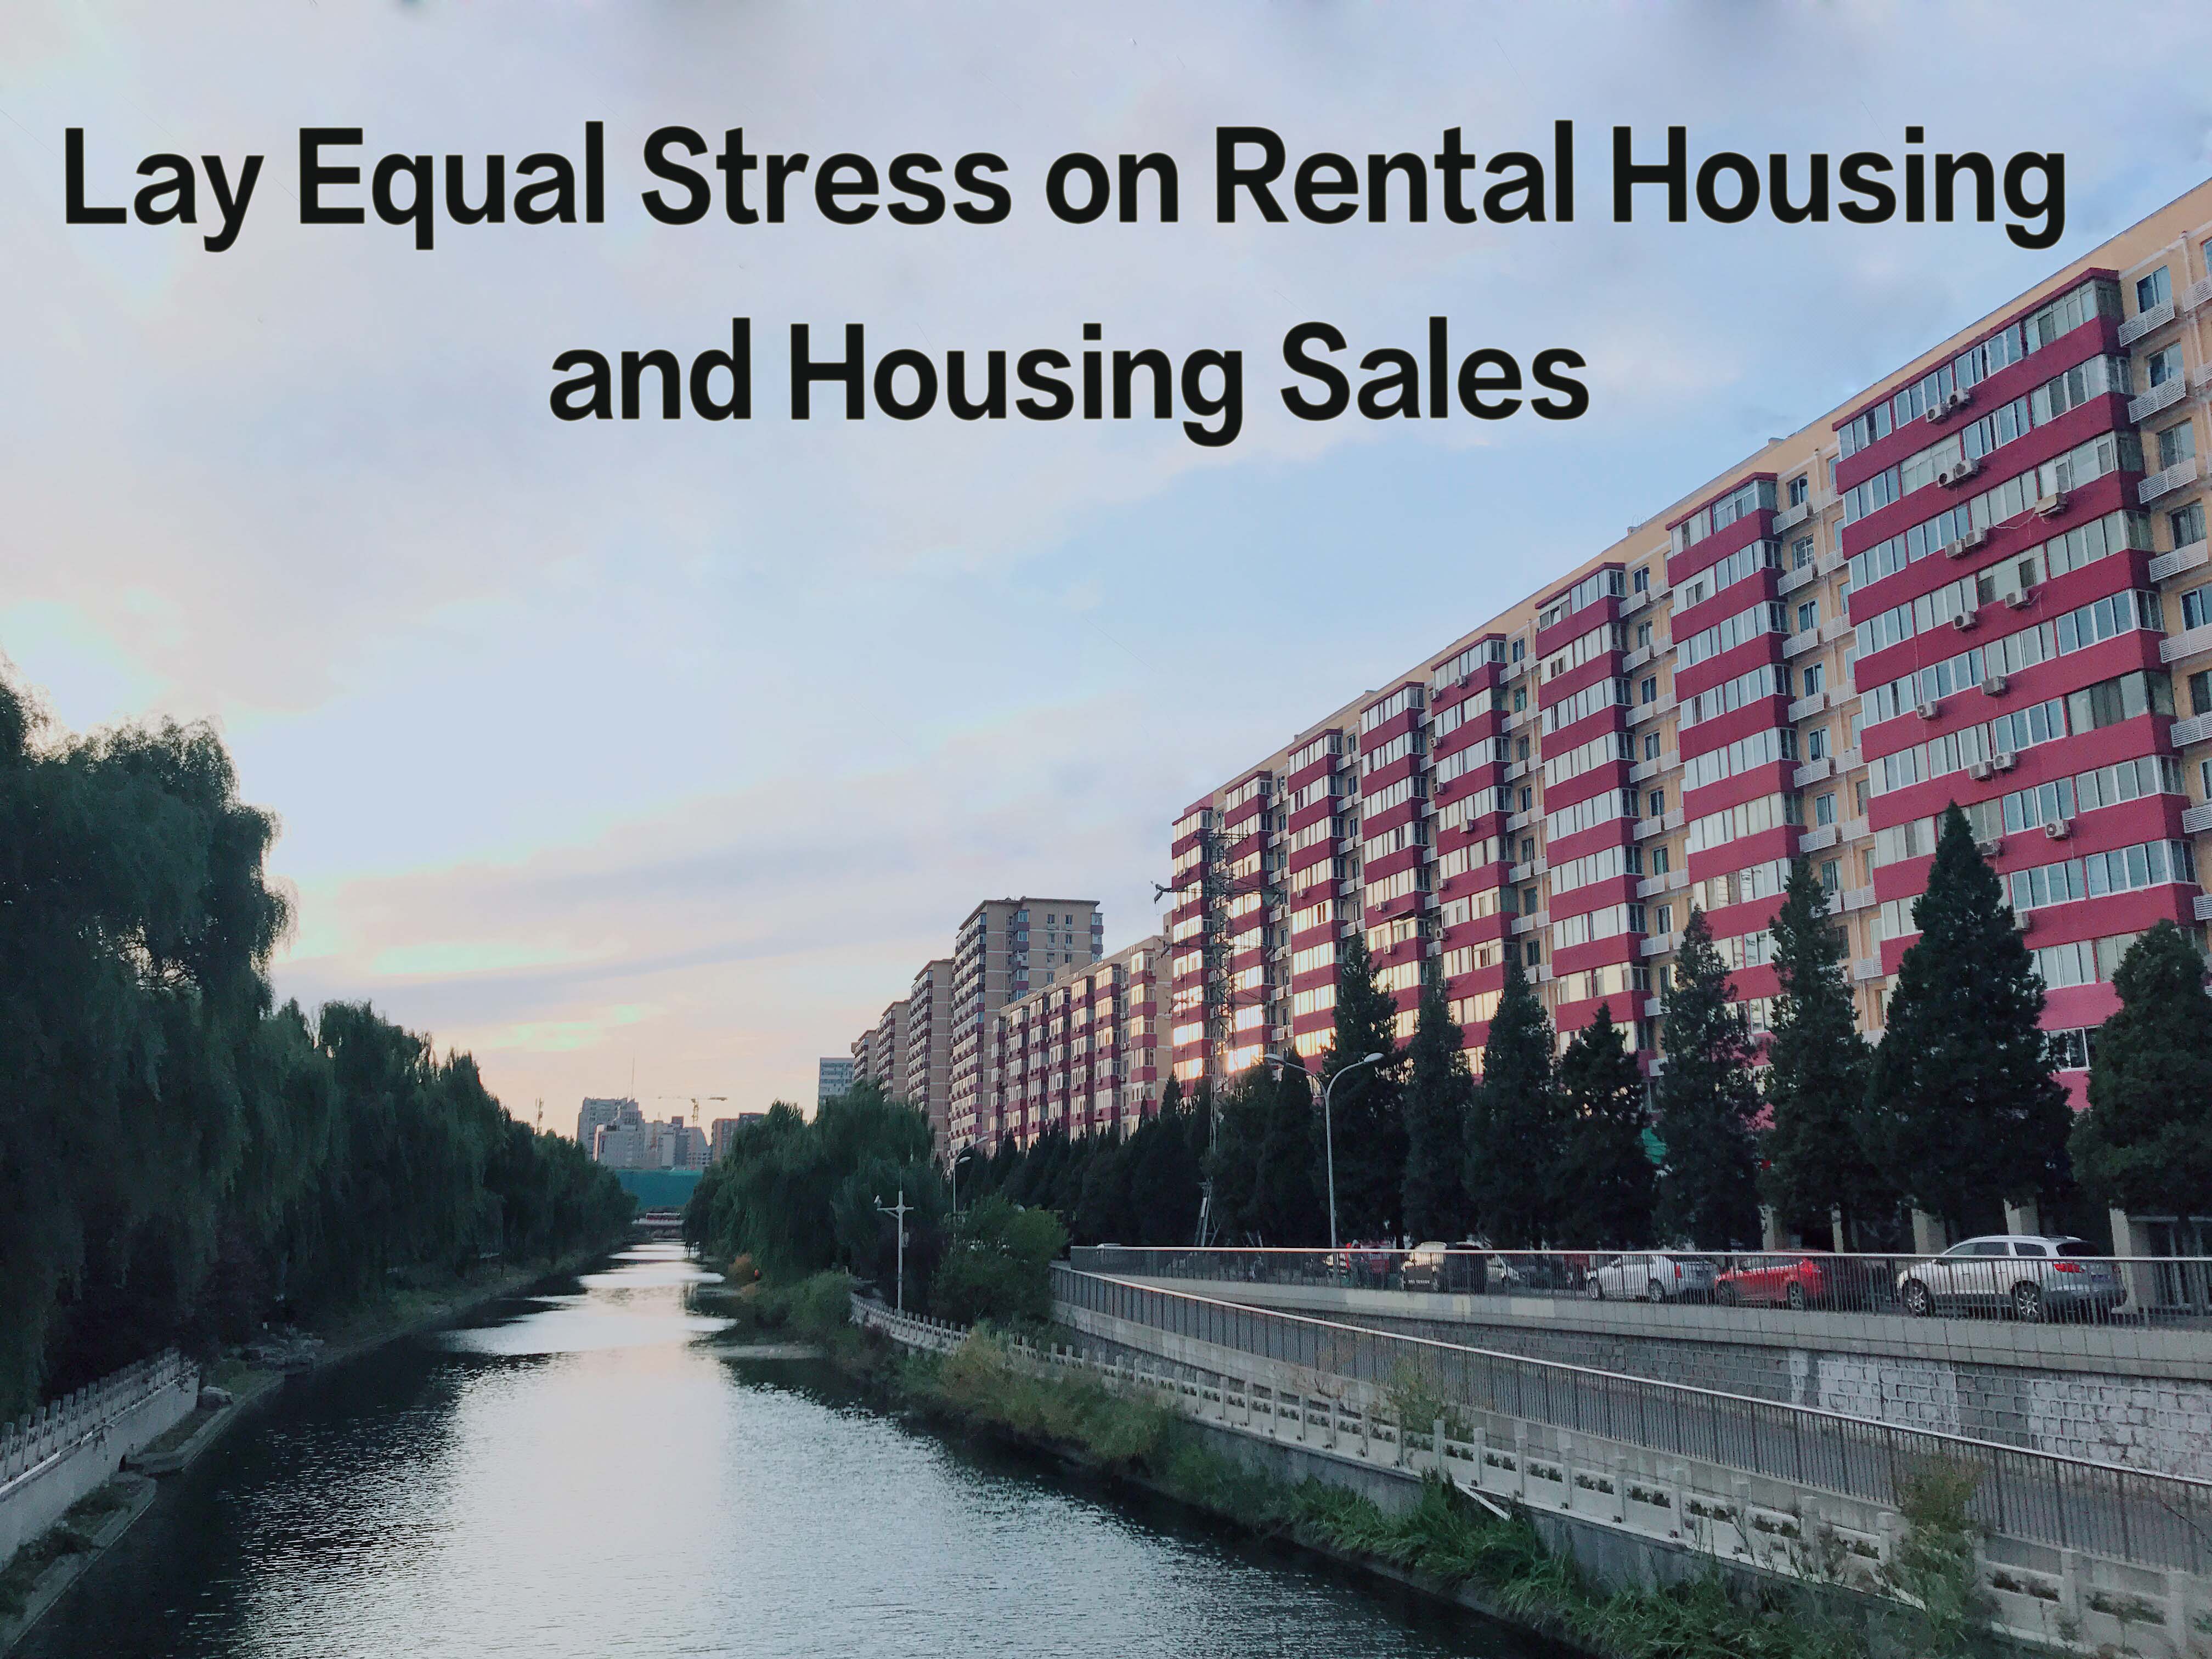 China Needs to Establish a Unified Housing Market System: Lay Equal Stress on Rental Housing and Housing Sales